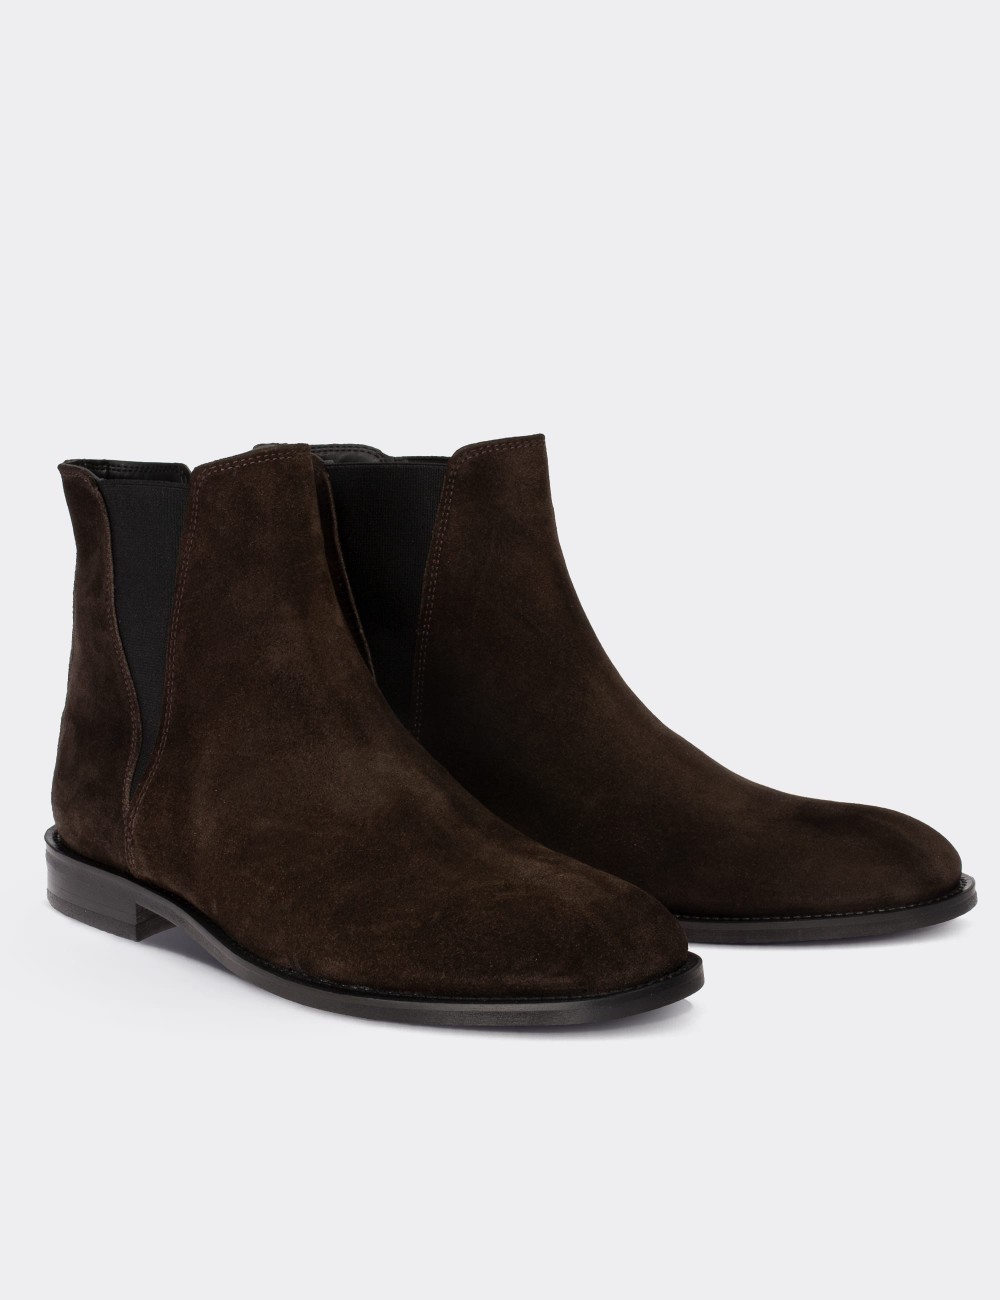 Brown Suede Leather Chelsea Boots - 01689MKHVM01